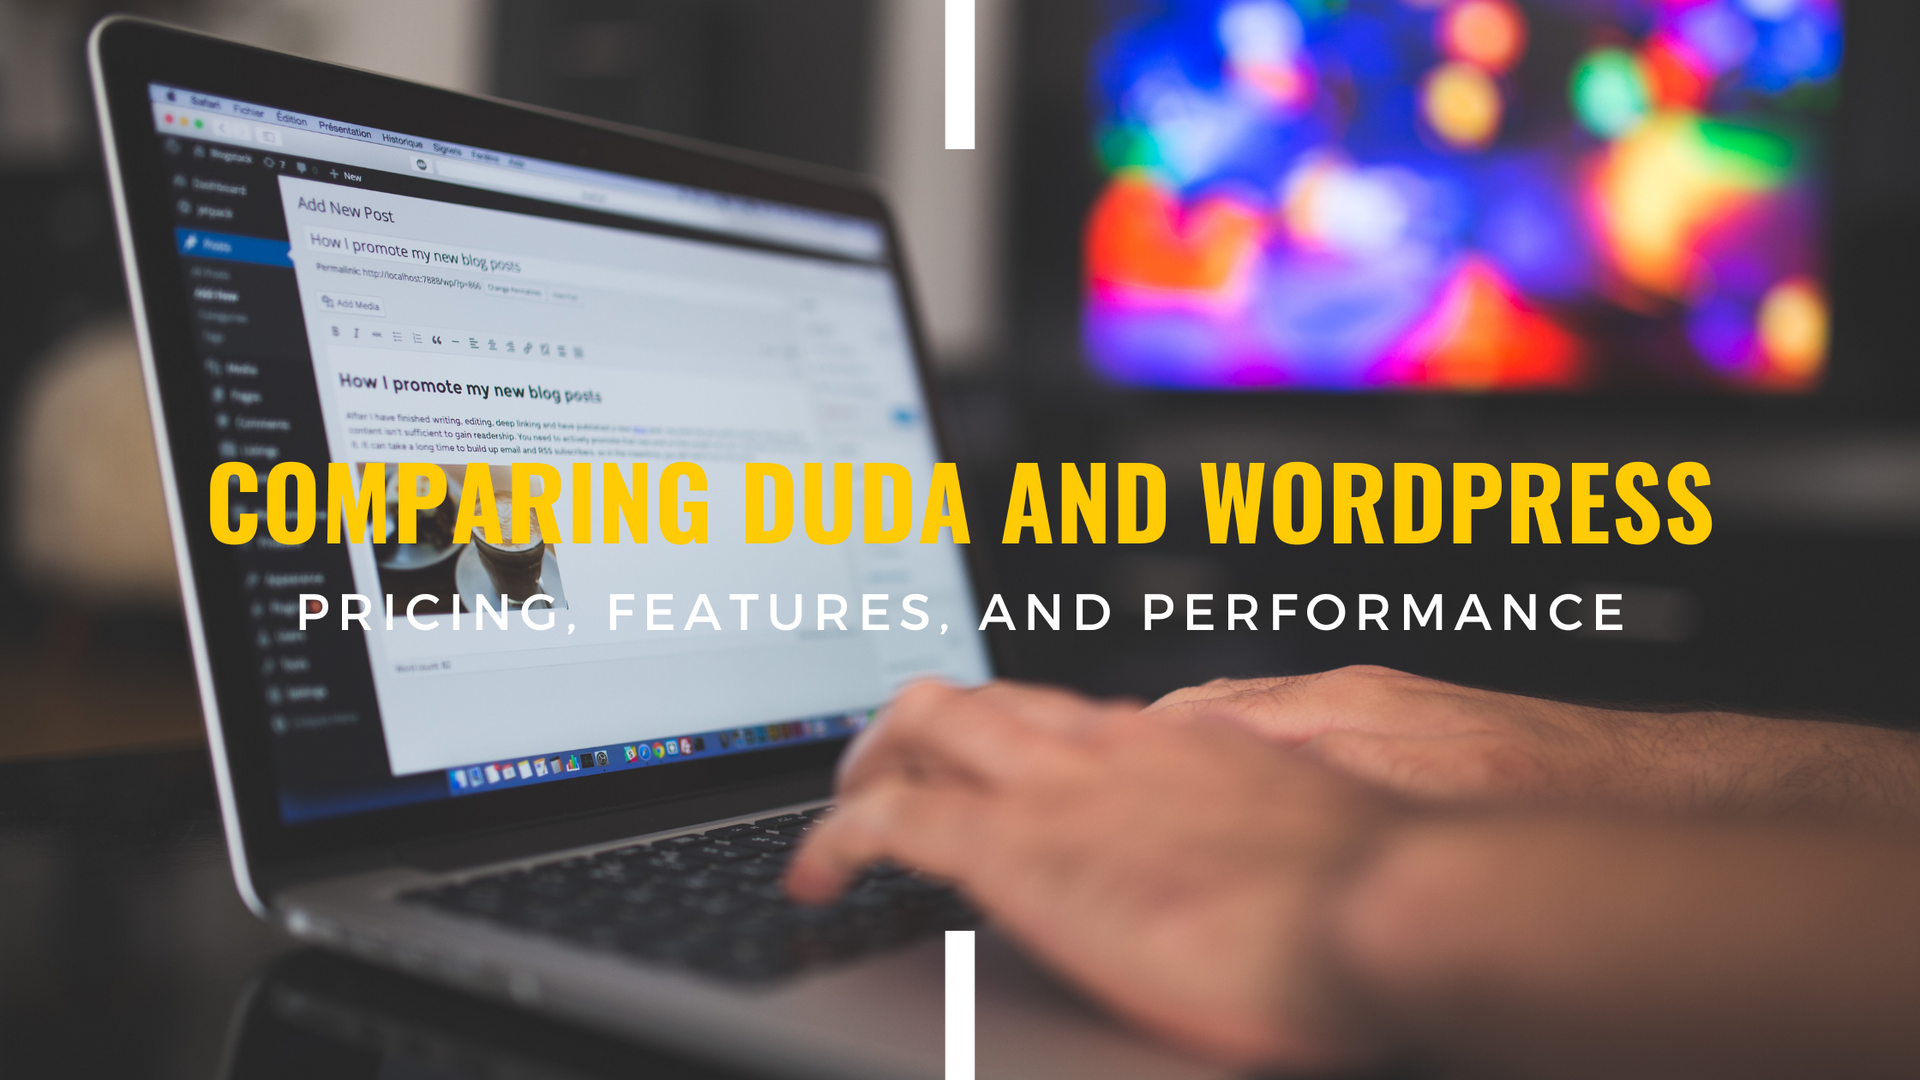 Business Owners - Use Duda over Wordpress